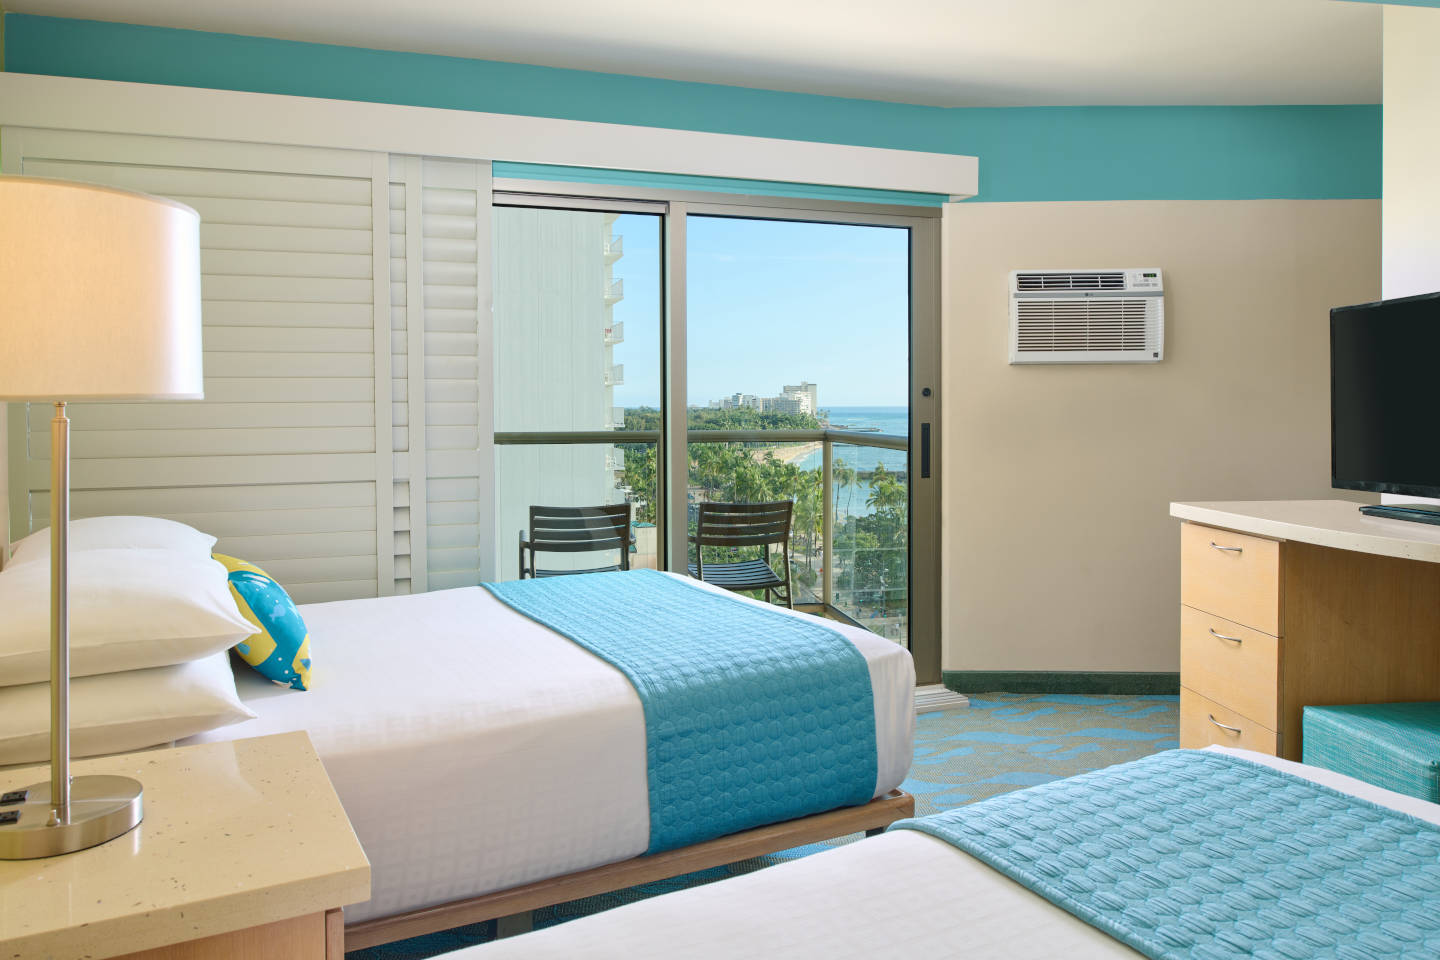 Ocean View Room accommodations with double beds, balcony and plantation shutters